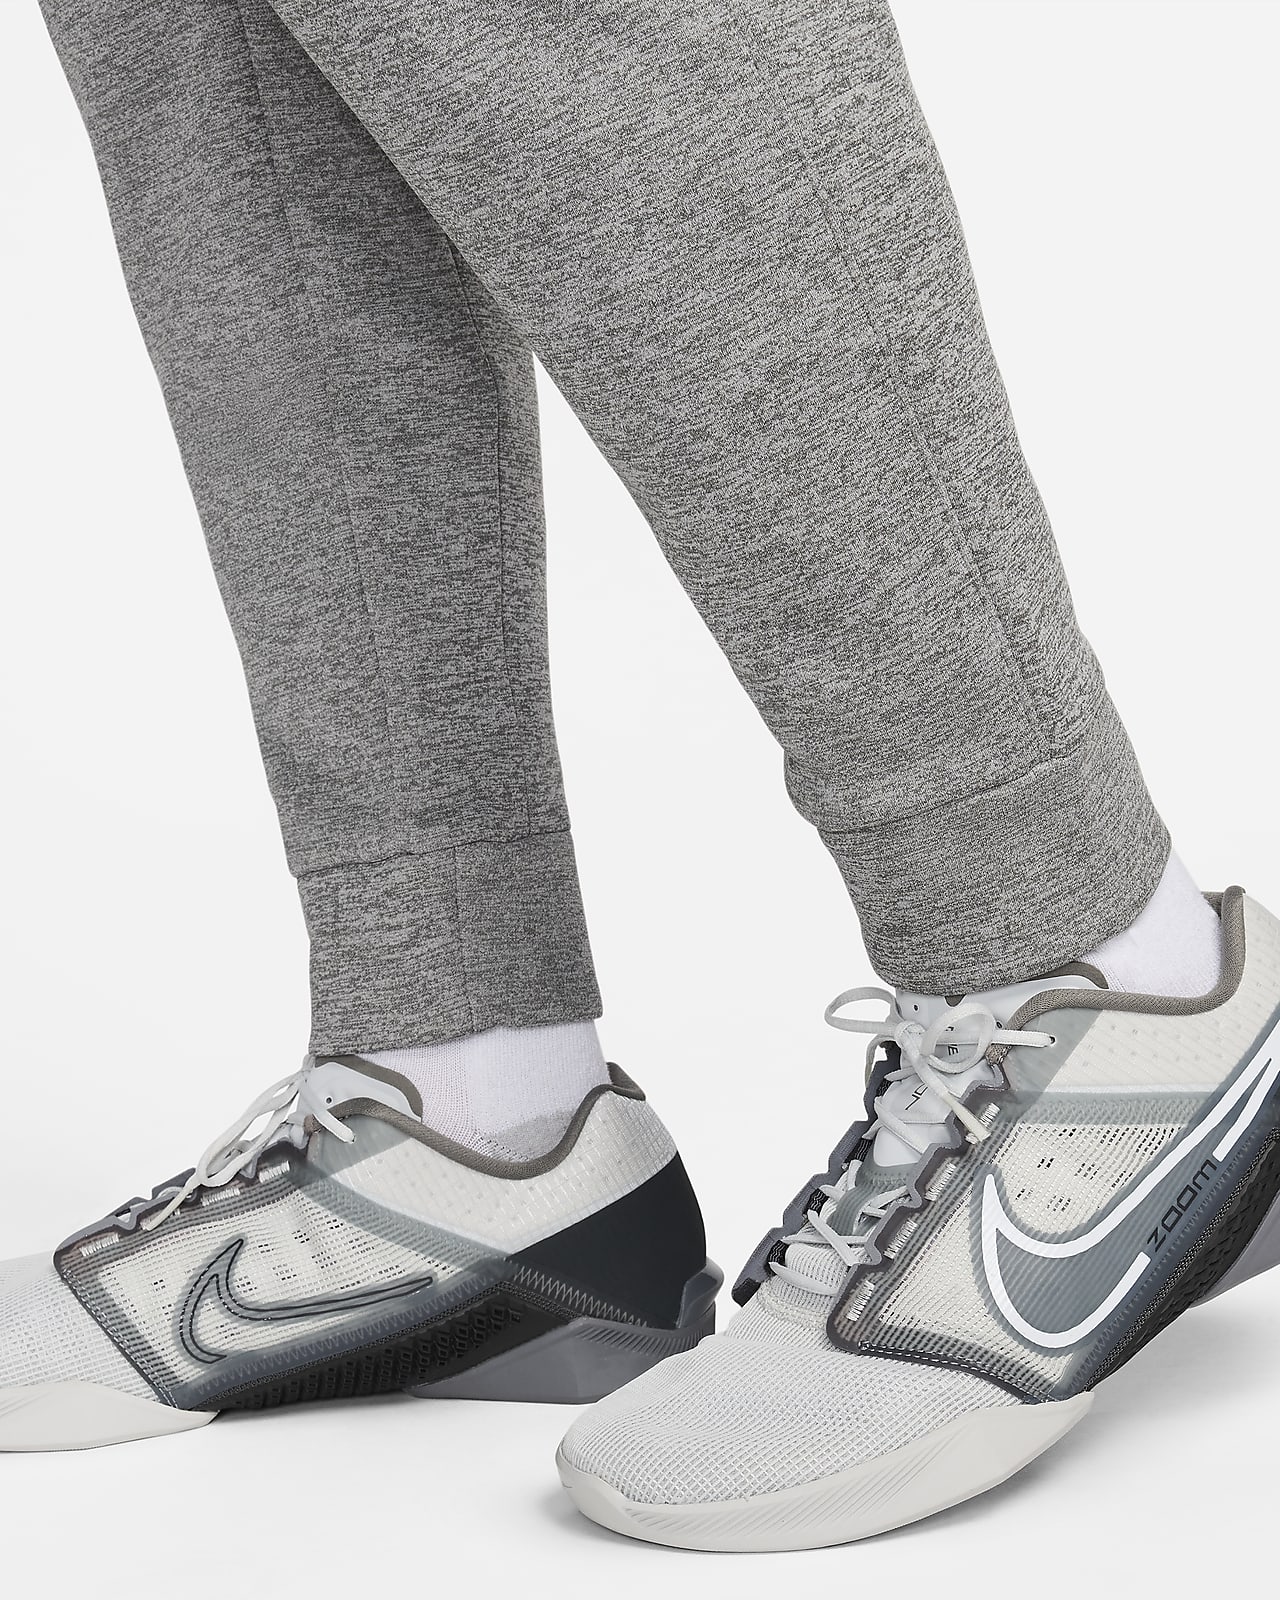 1571.NIKE Therma-Fit テパードトレーニングパンツ L-connectedremag.com